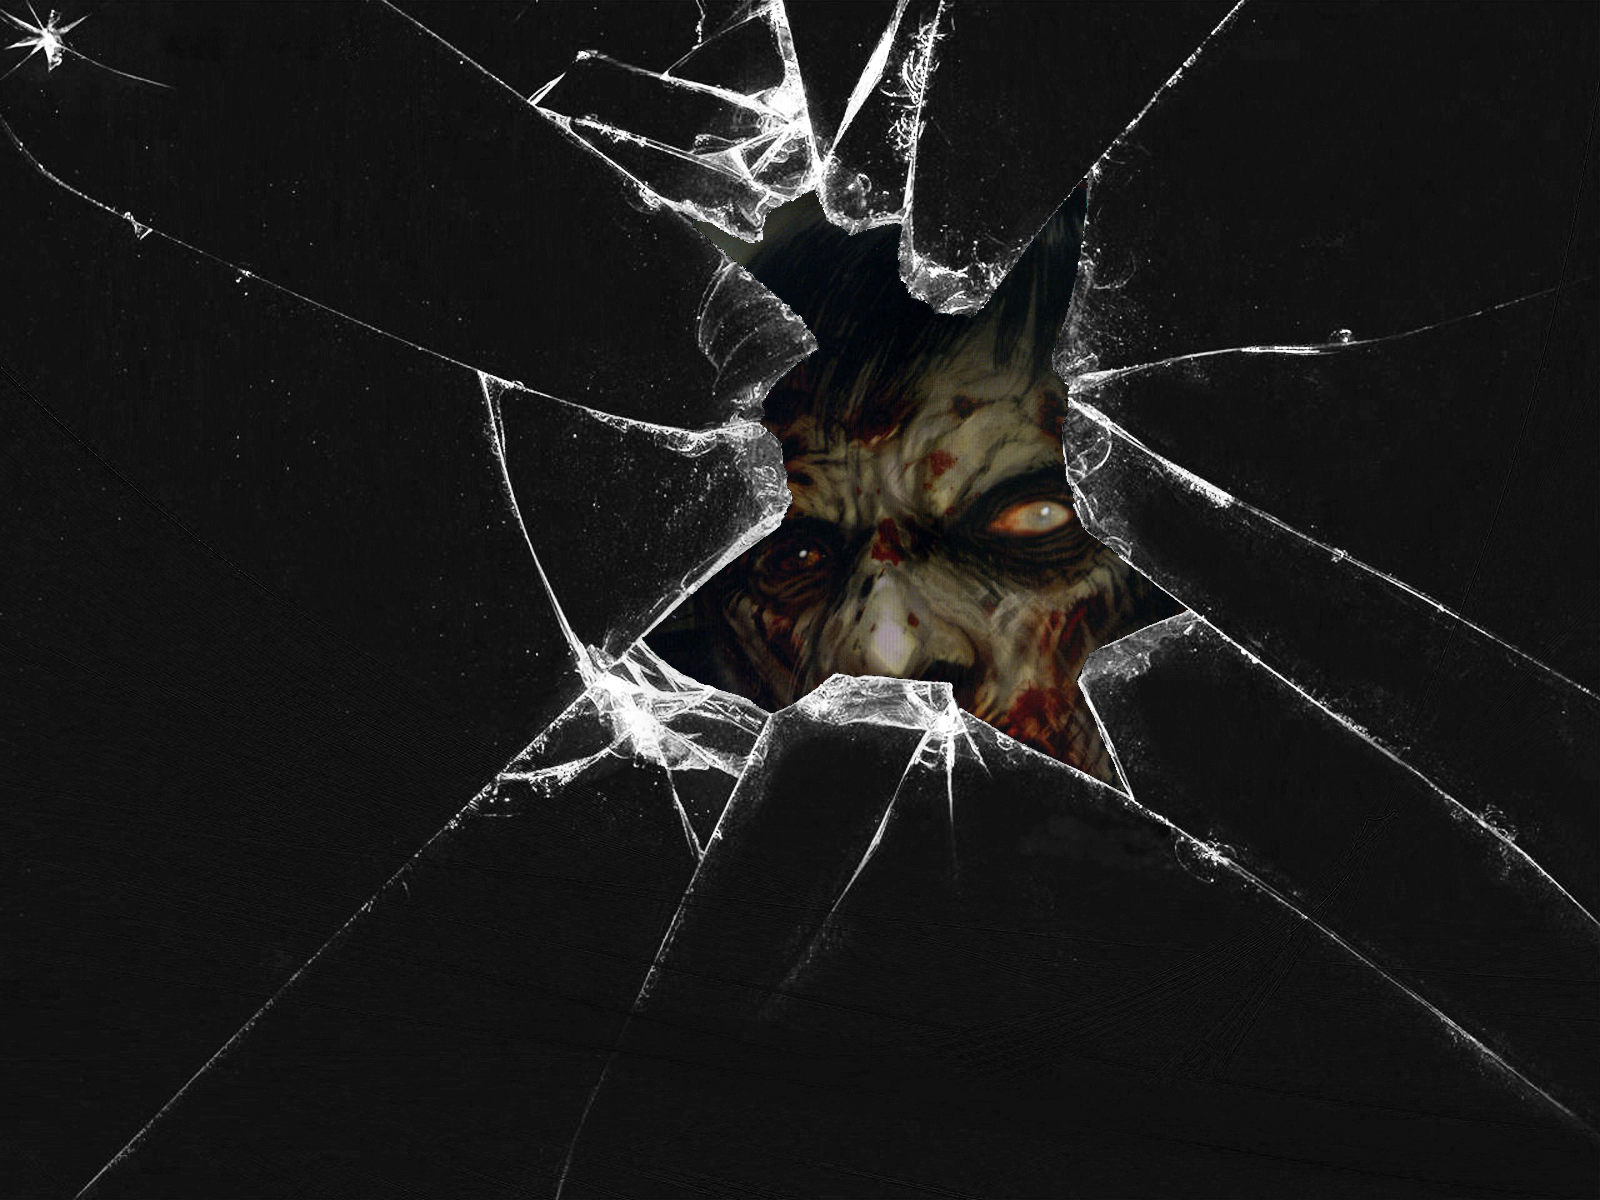 zombie wallpaper,whiskers,black,darkness,cat,spider web